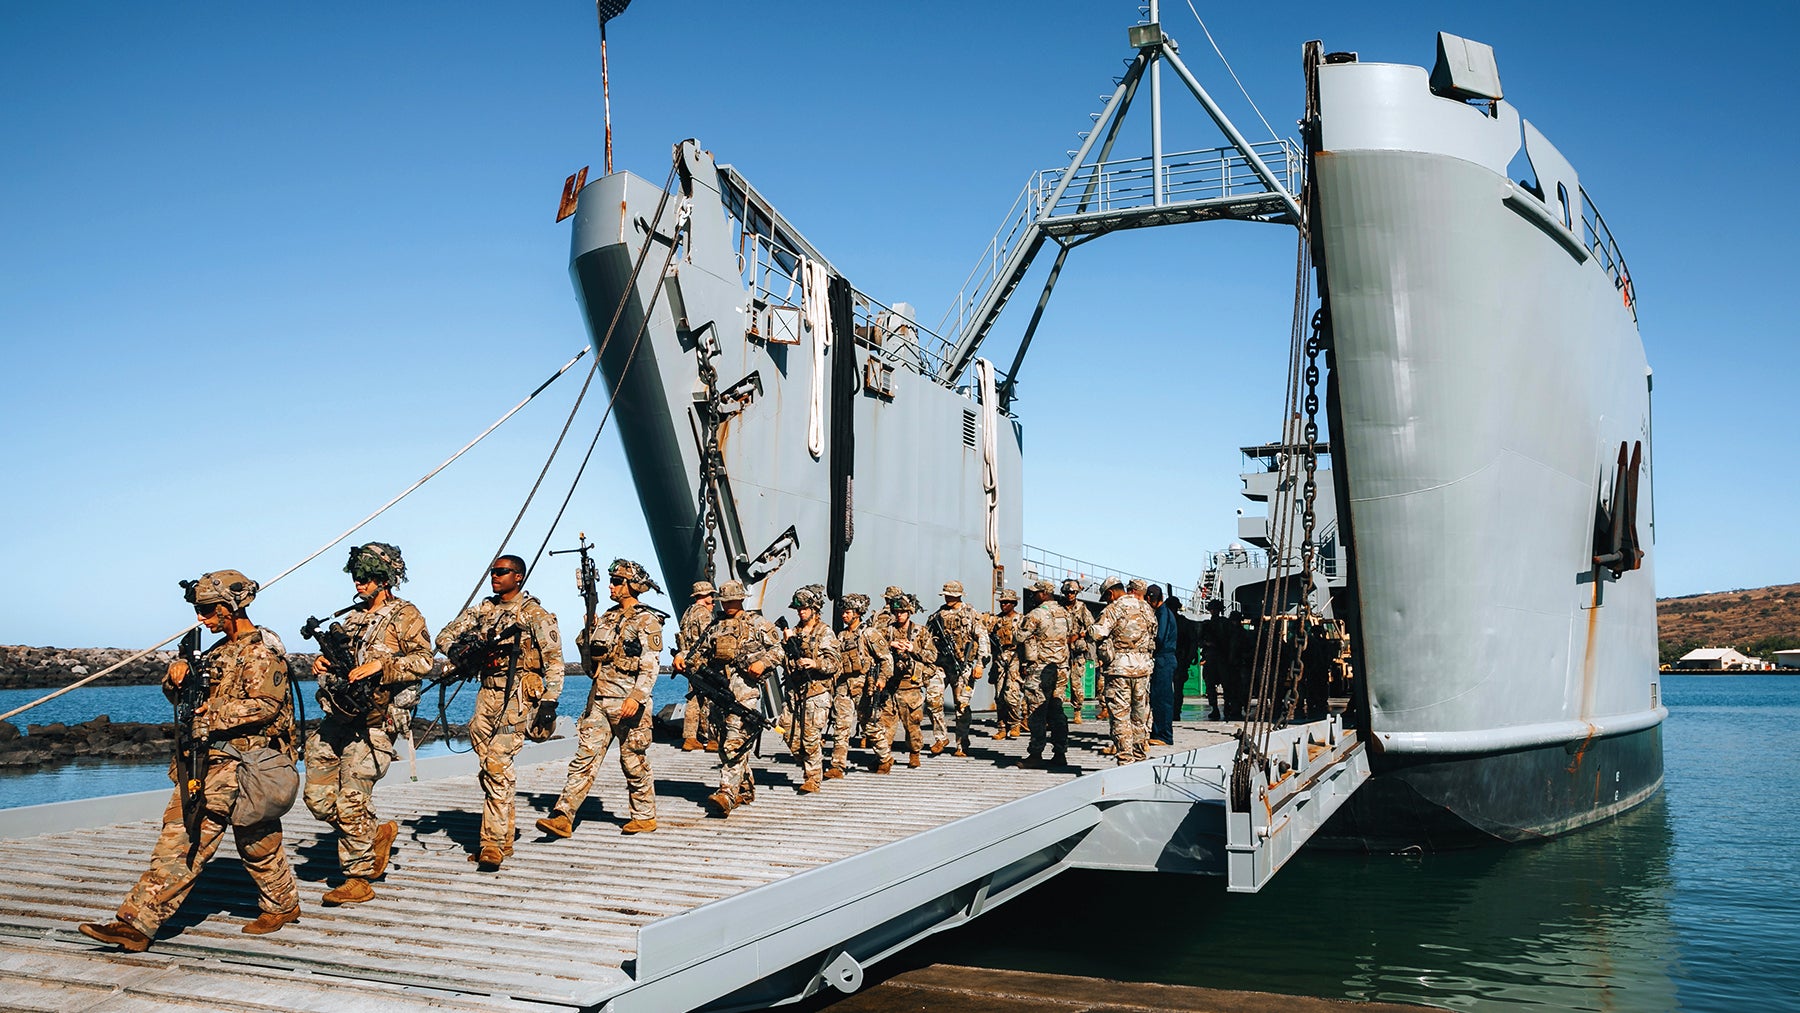 Soldiers from the 3rd Brigade Combat Team, 25th Infantry Division, disembark from the Army’s Gen. Brehon B. Somervell Logistics Support Vessel in Hawaii. (Credit: U.S. Army/Spc. Rachel Christensen)